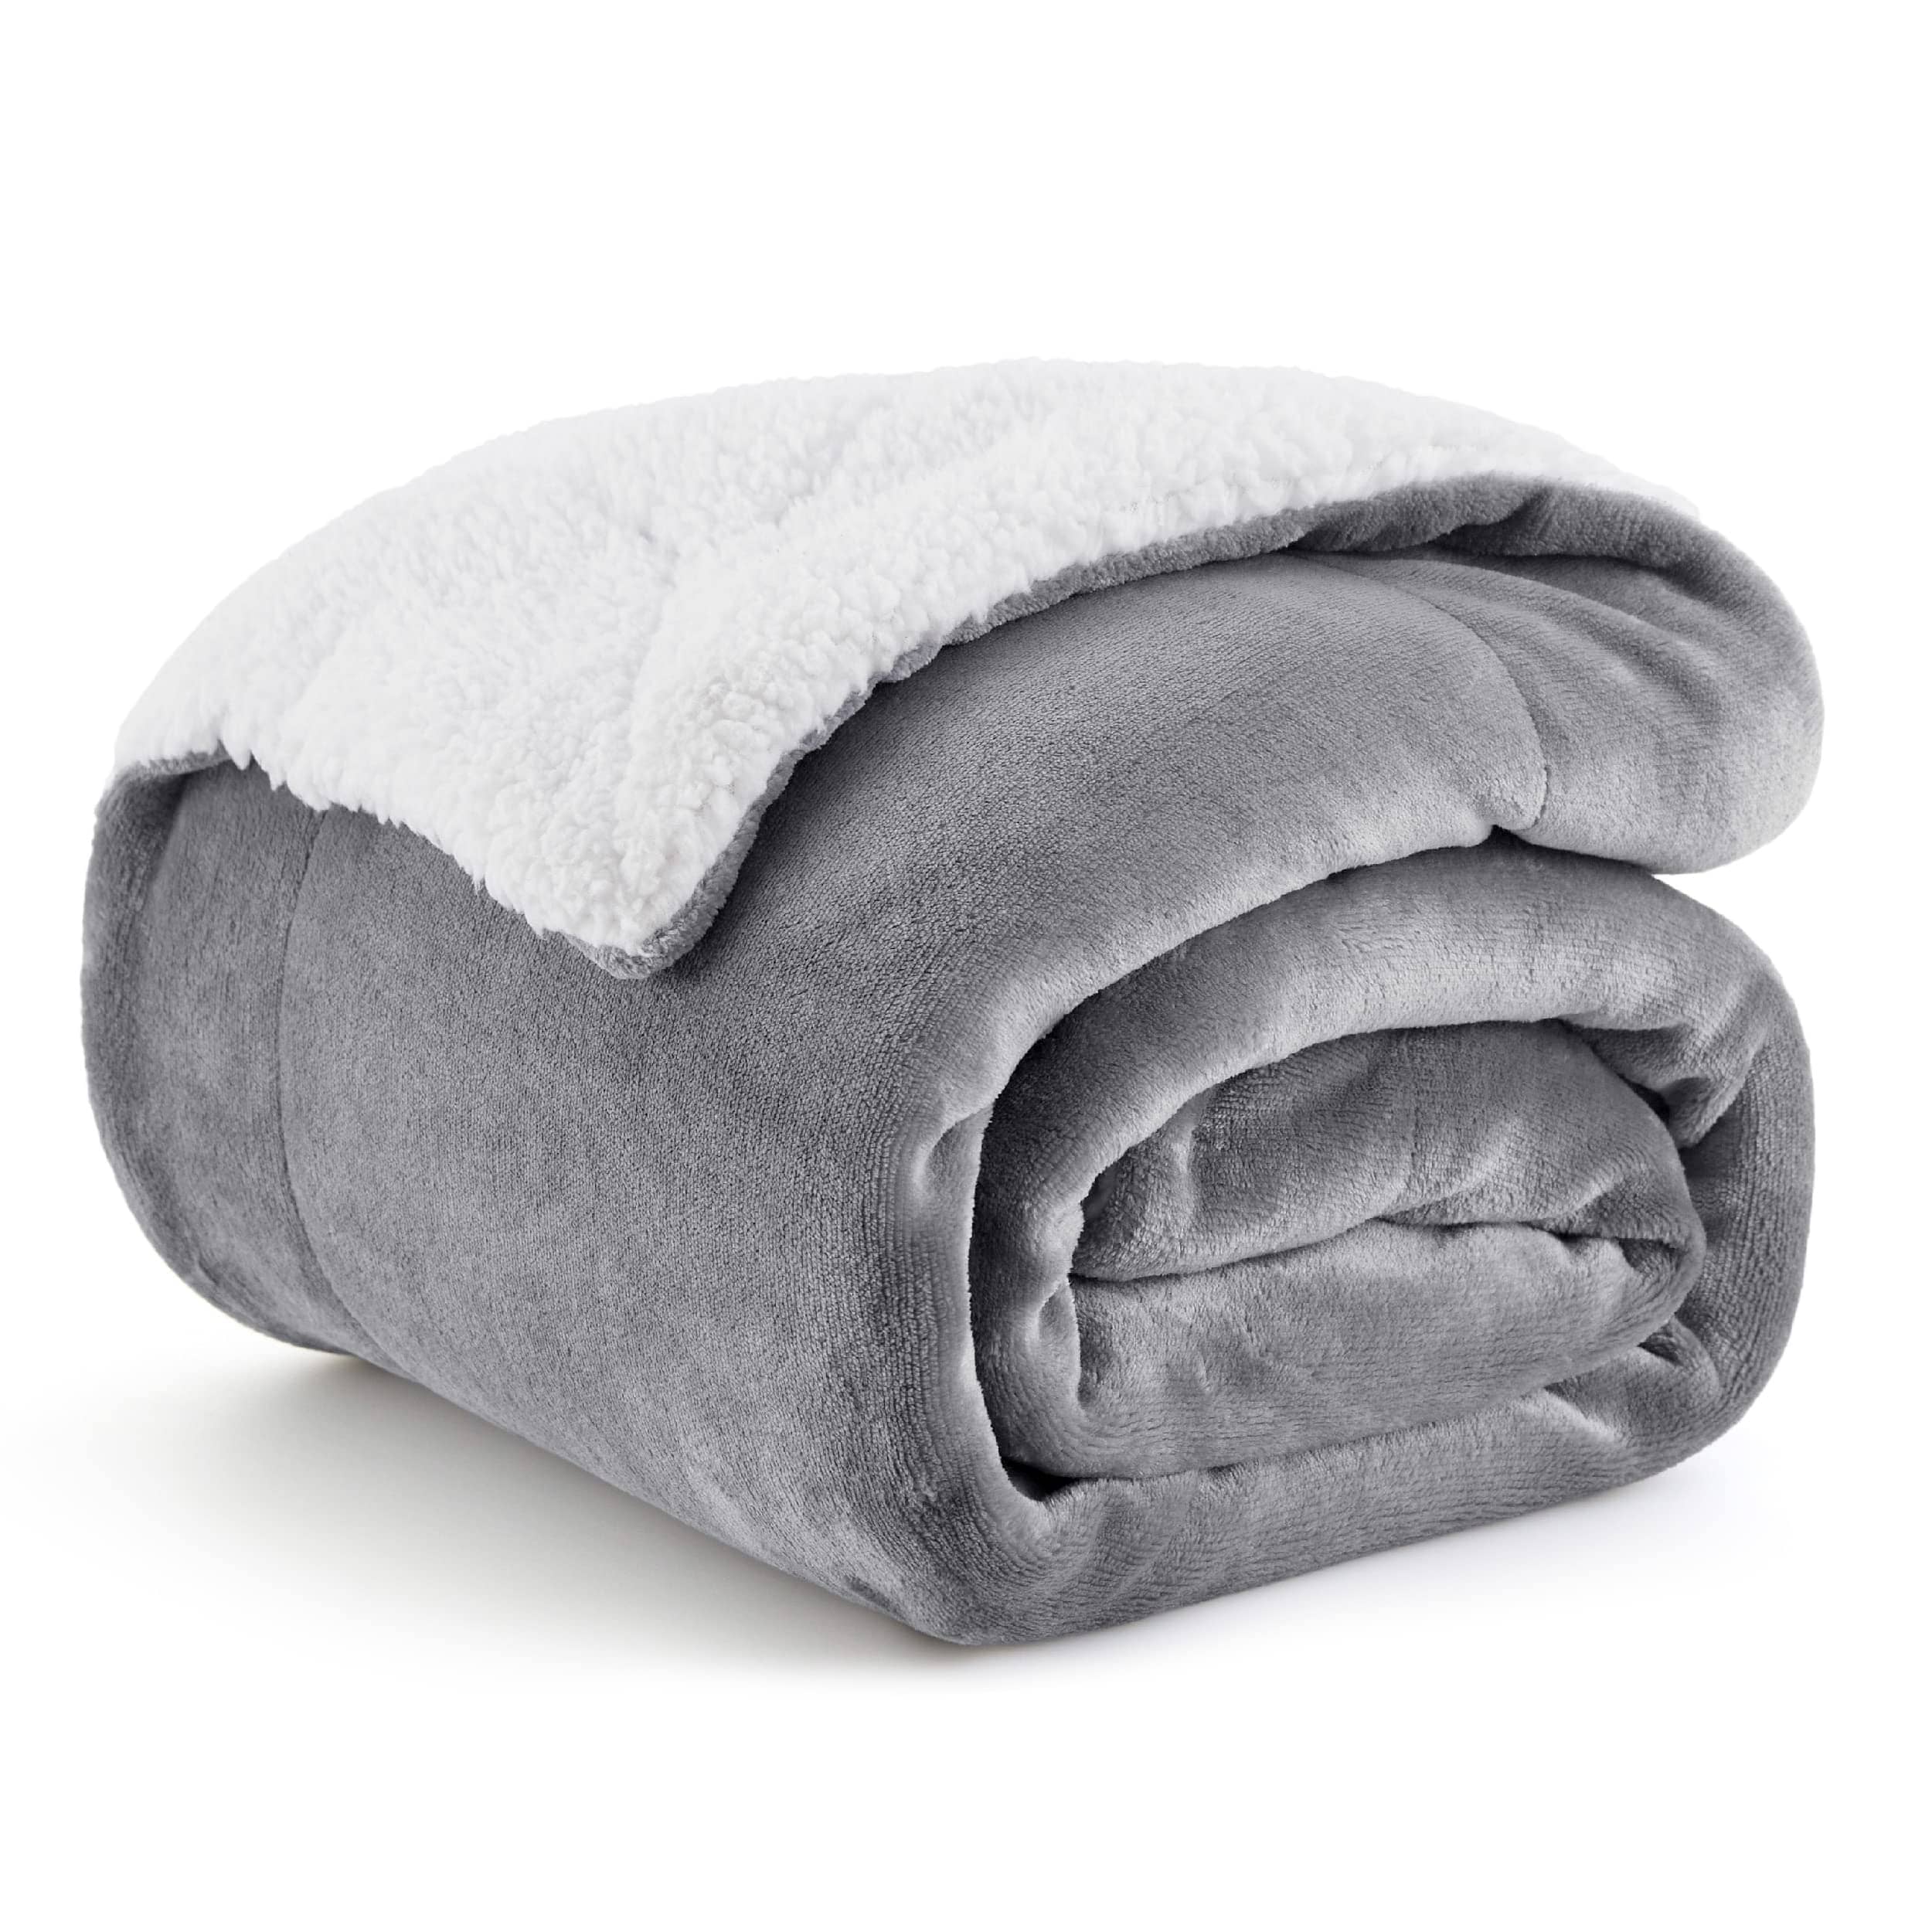 Bedsure Fleece Blanket Queen Size for Bed - Grey Queen Blanket Winter Fuzzy  Cozy Soft Plush Warm Blankets for Bed, 90x90 inches